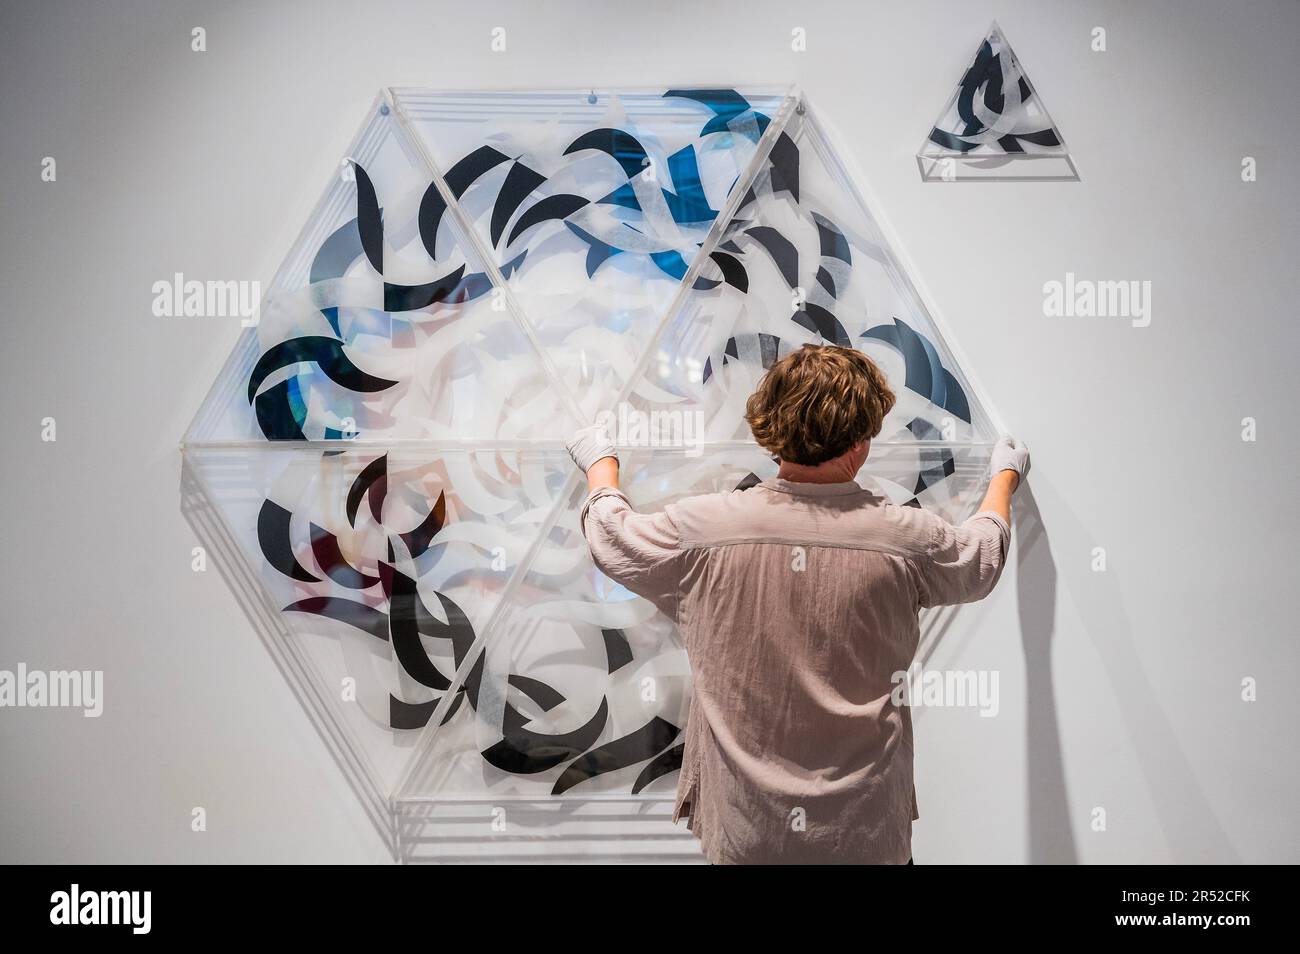 London, UK. 31st May, 2023. Final adjustments to Hexagon, 2018 by Brigita Huemer - Sensory Synergy at Mucciaccia Gallery in Mayfair. Featuring six new sculptures by Misha Milovanovich, a Serbian artist based in London, and nine plexiglass paintings Brigita Huemer Limentani, an Austrian Croatian artist based in Italy. Curated by Catherine Loewe. Credit: Guy Bell/Alamy Live News Stock Photo